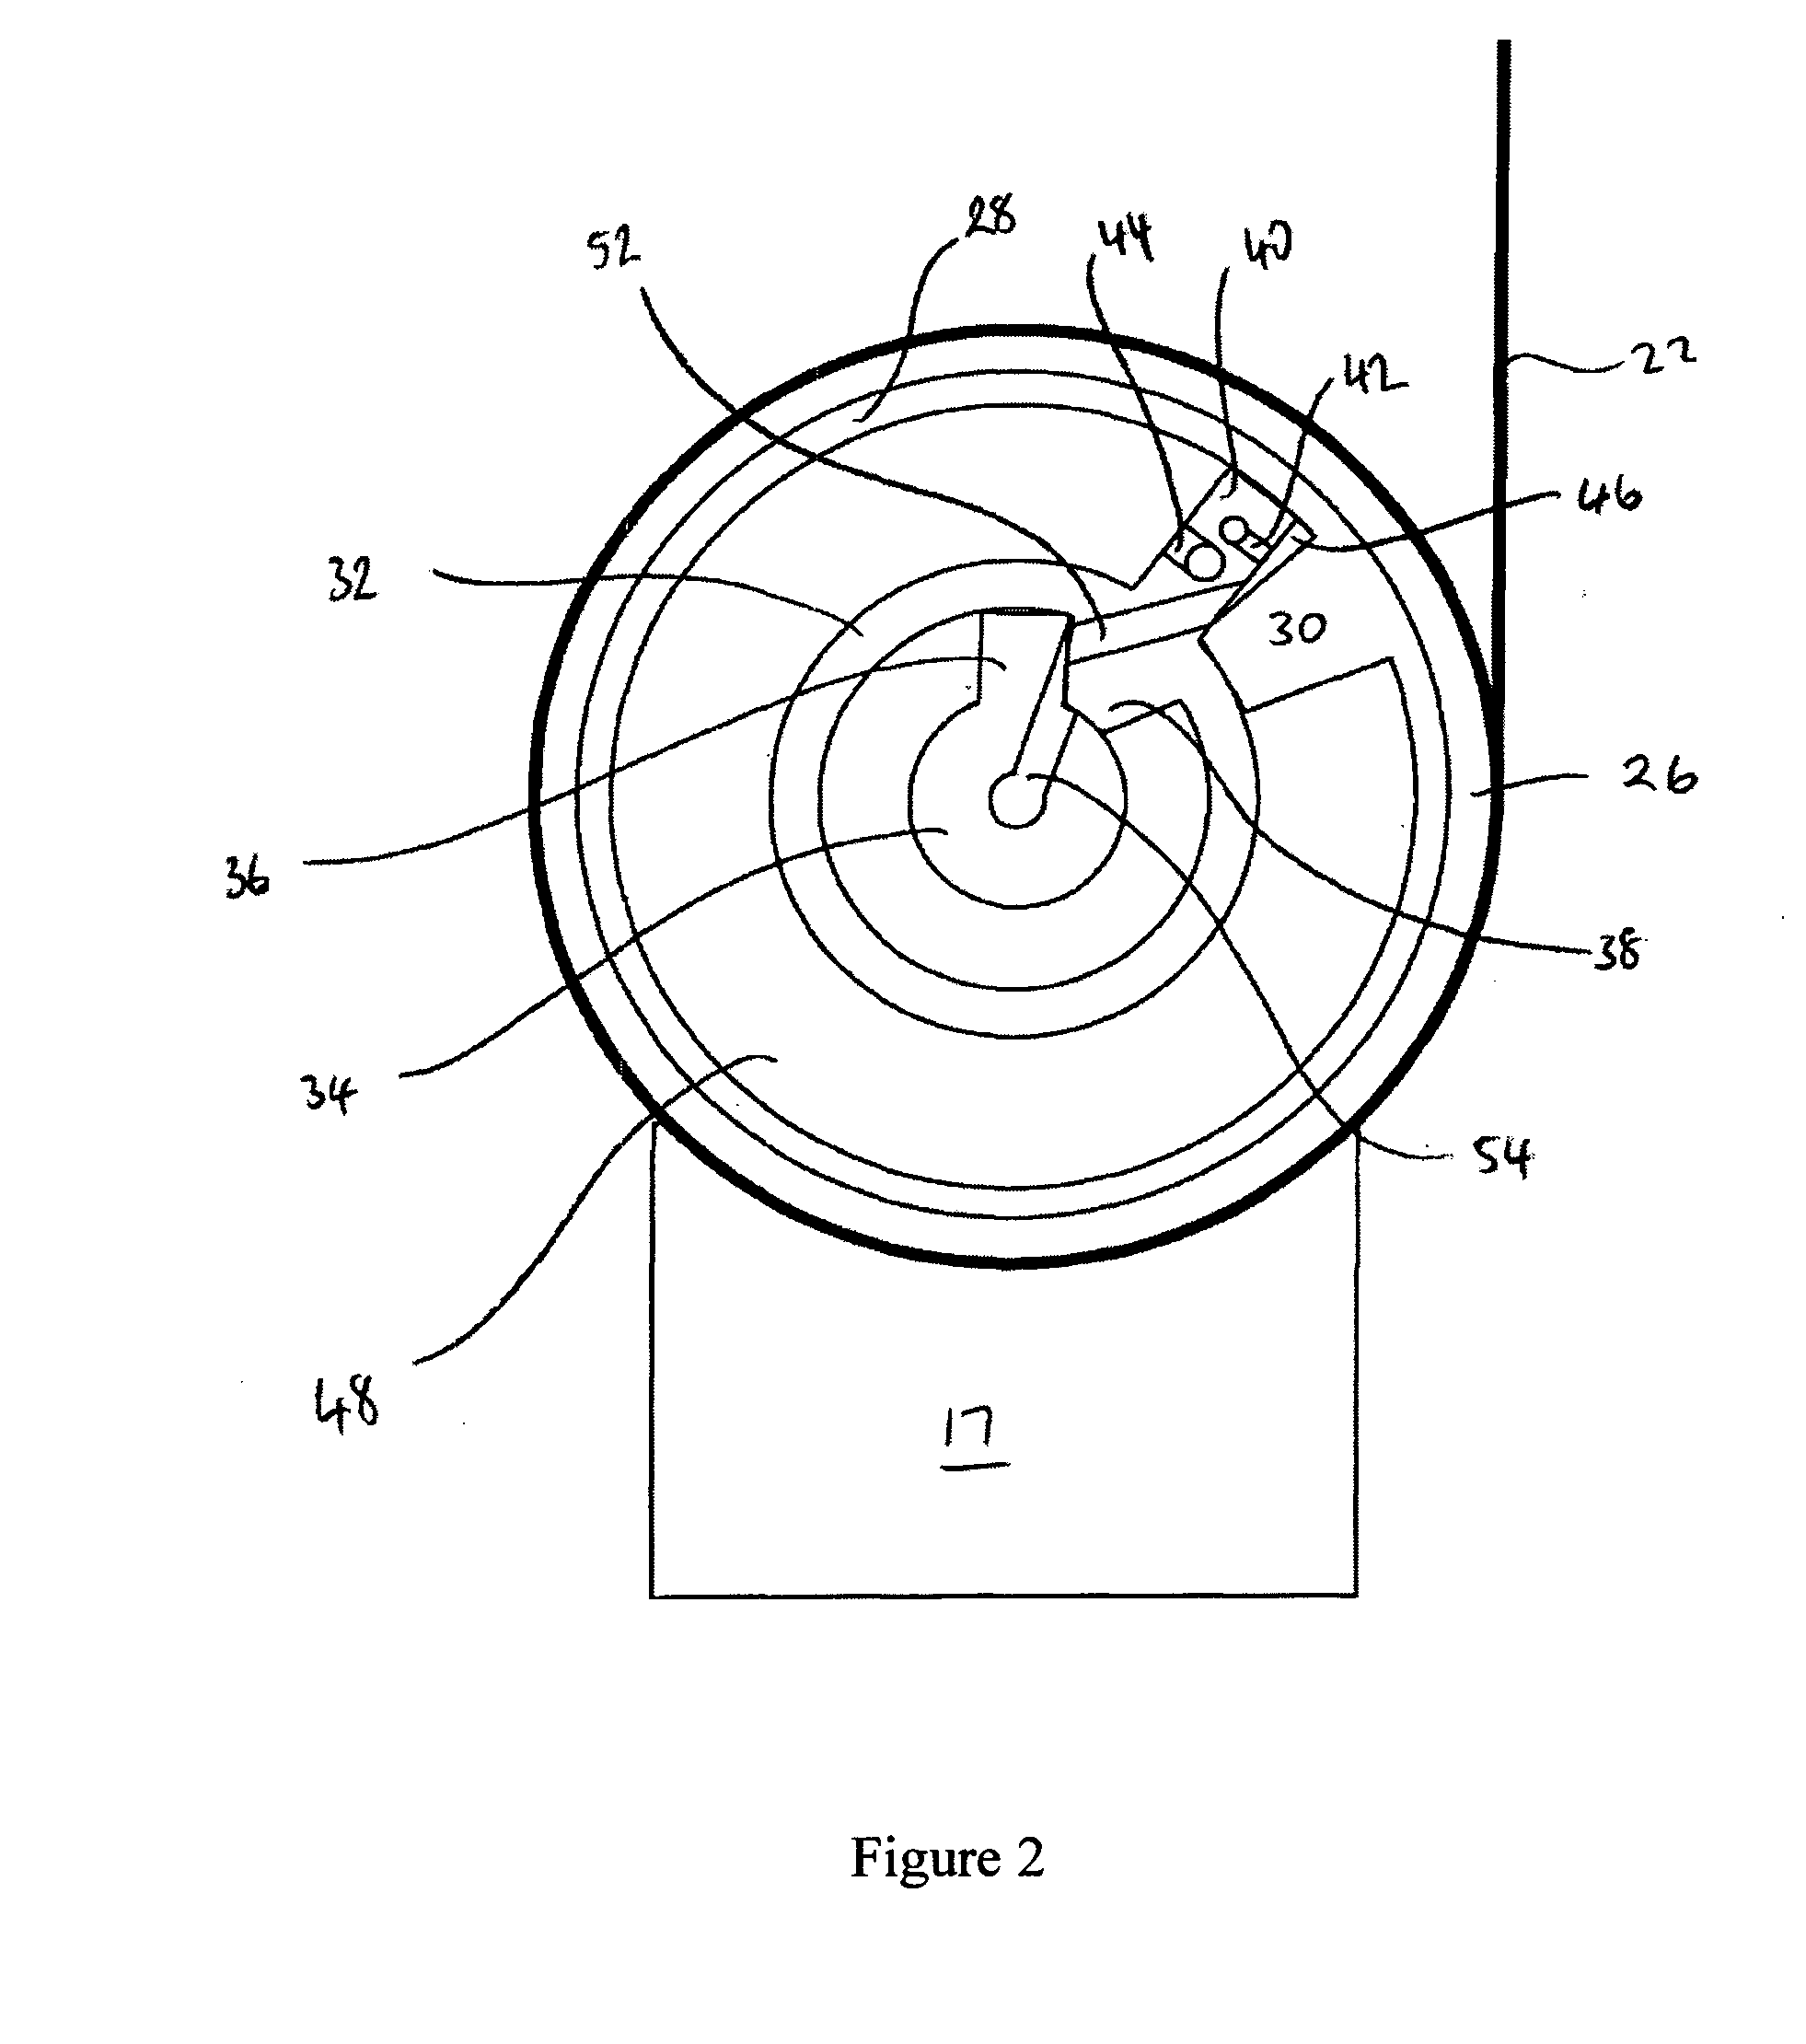 Restraint system for a seat belt device